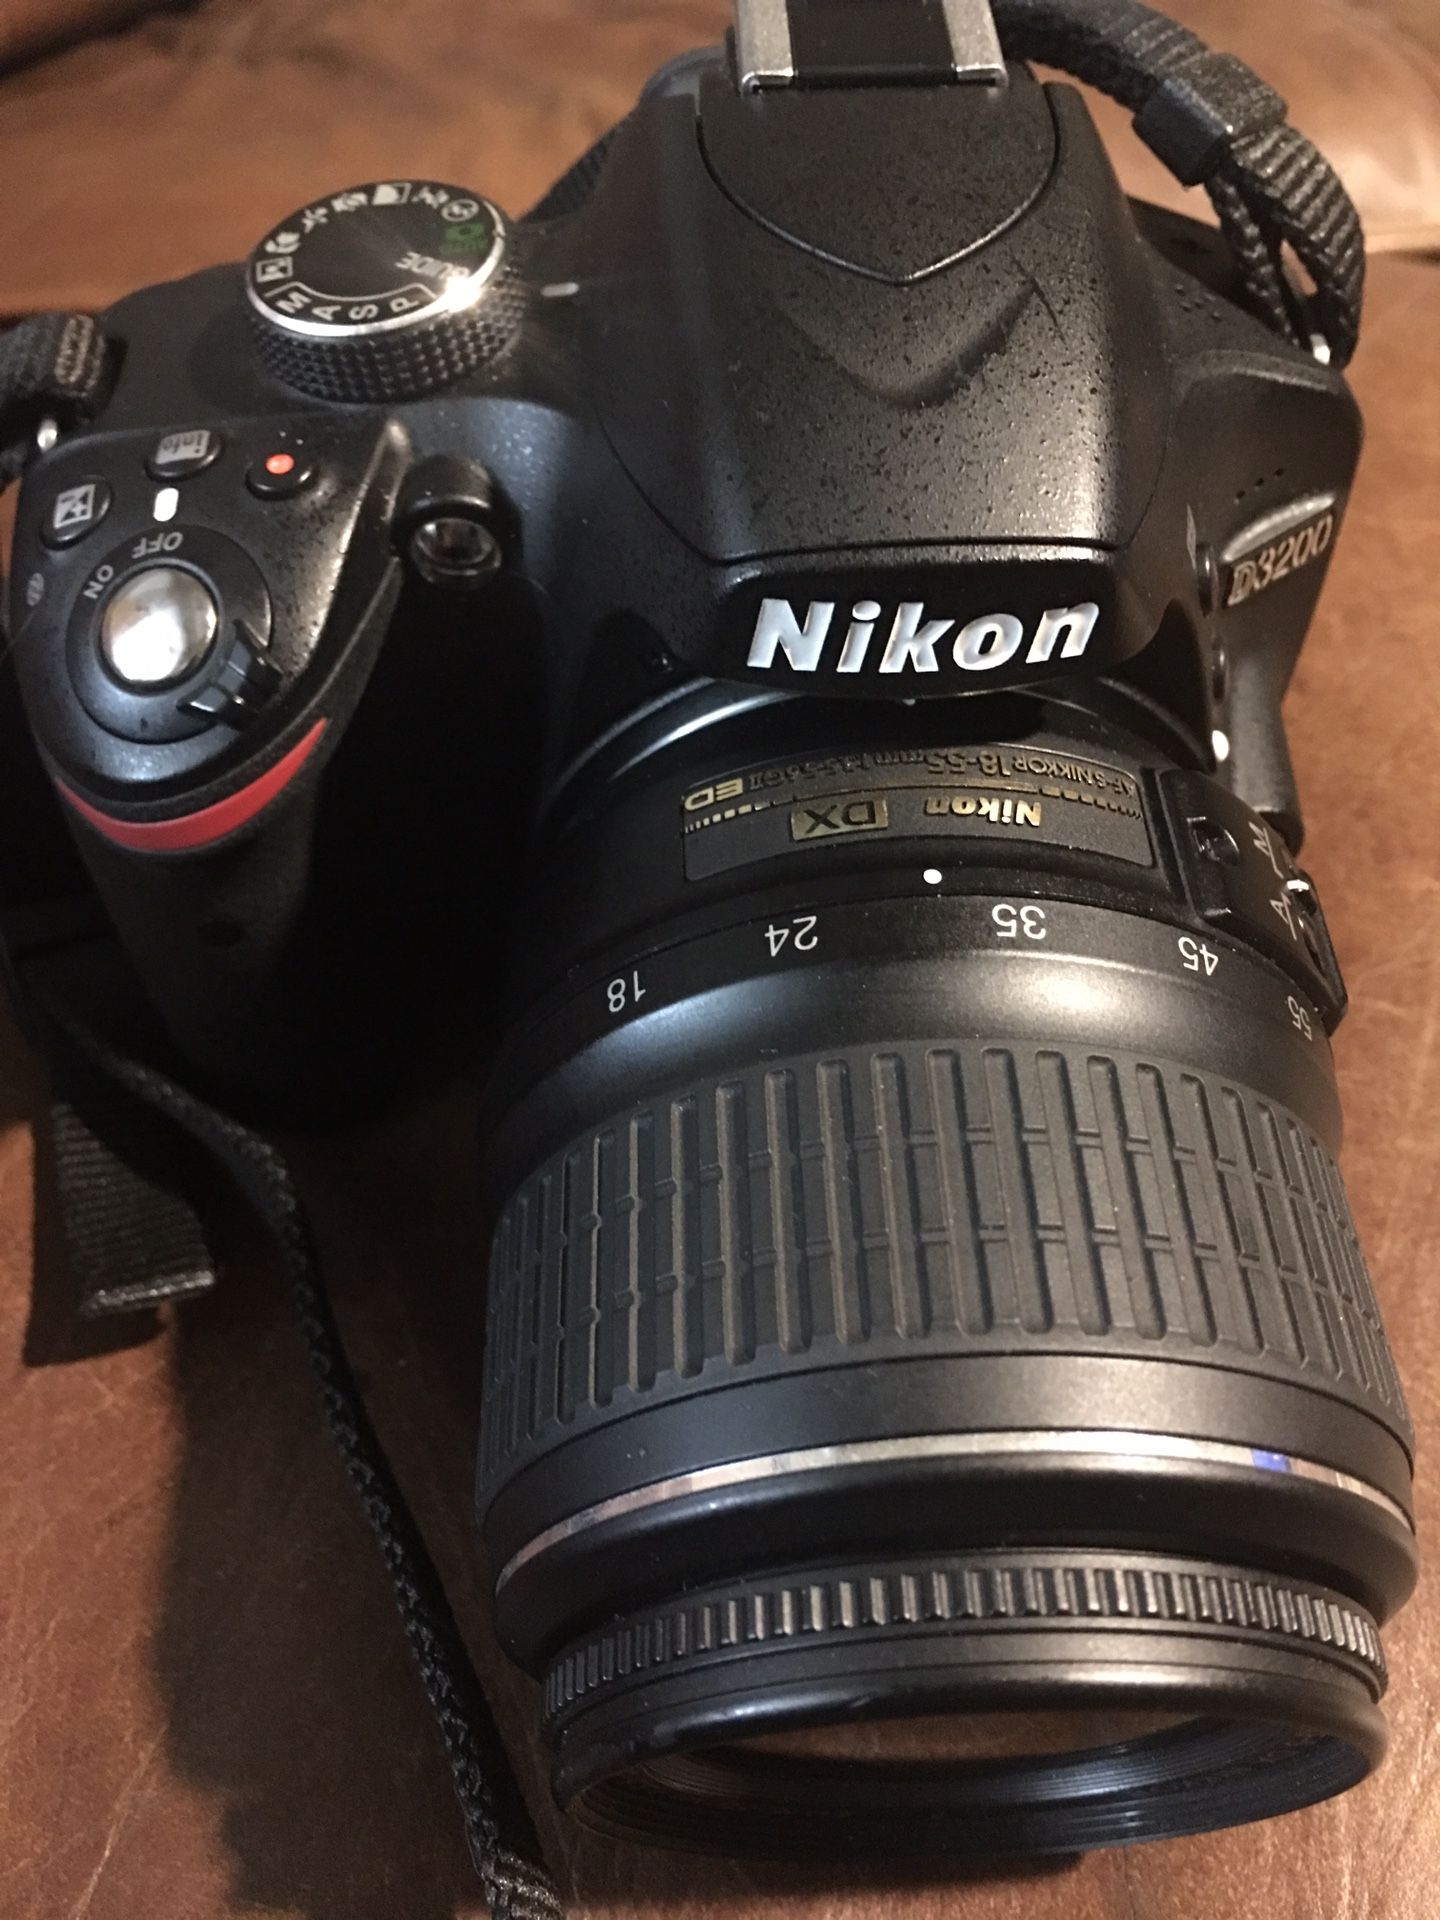 NIKON D3200 with 2 lenses and a tripod